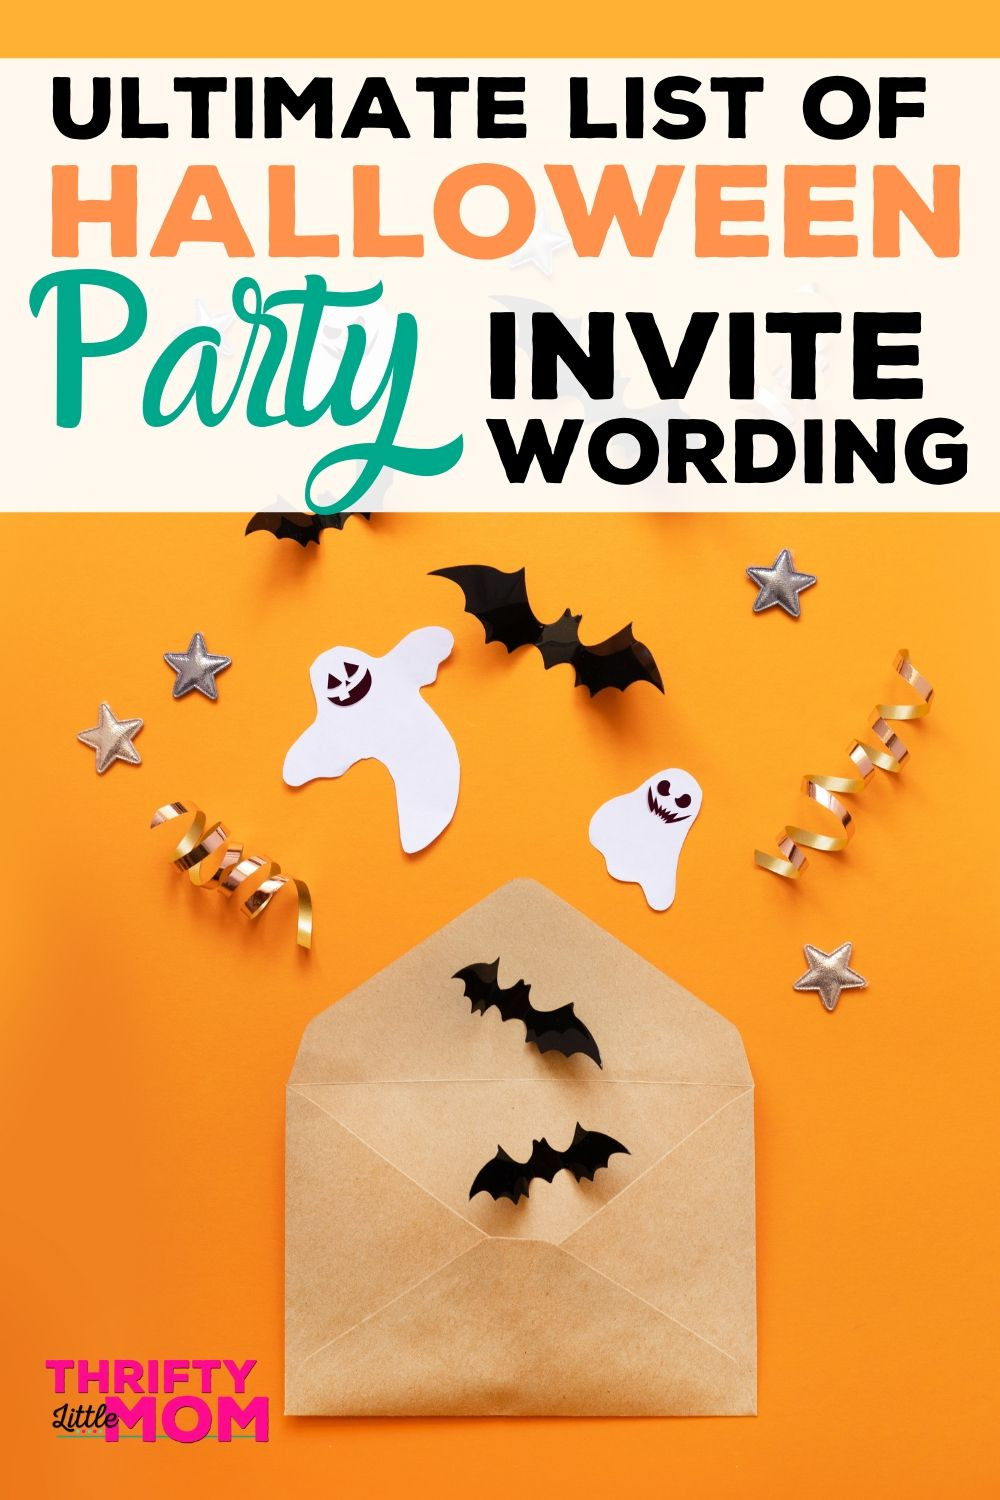 Halloween Party Names Ideas
 Best Halloween Party Names By Theme For Your Invitations